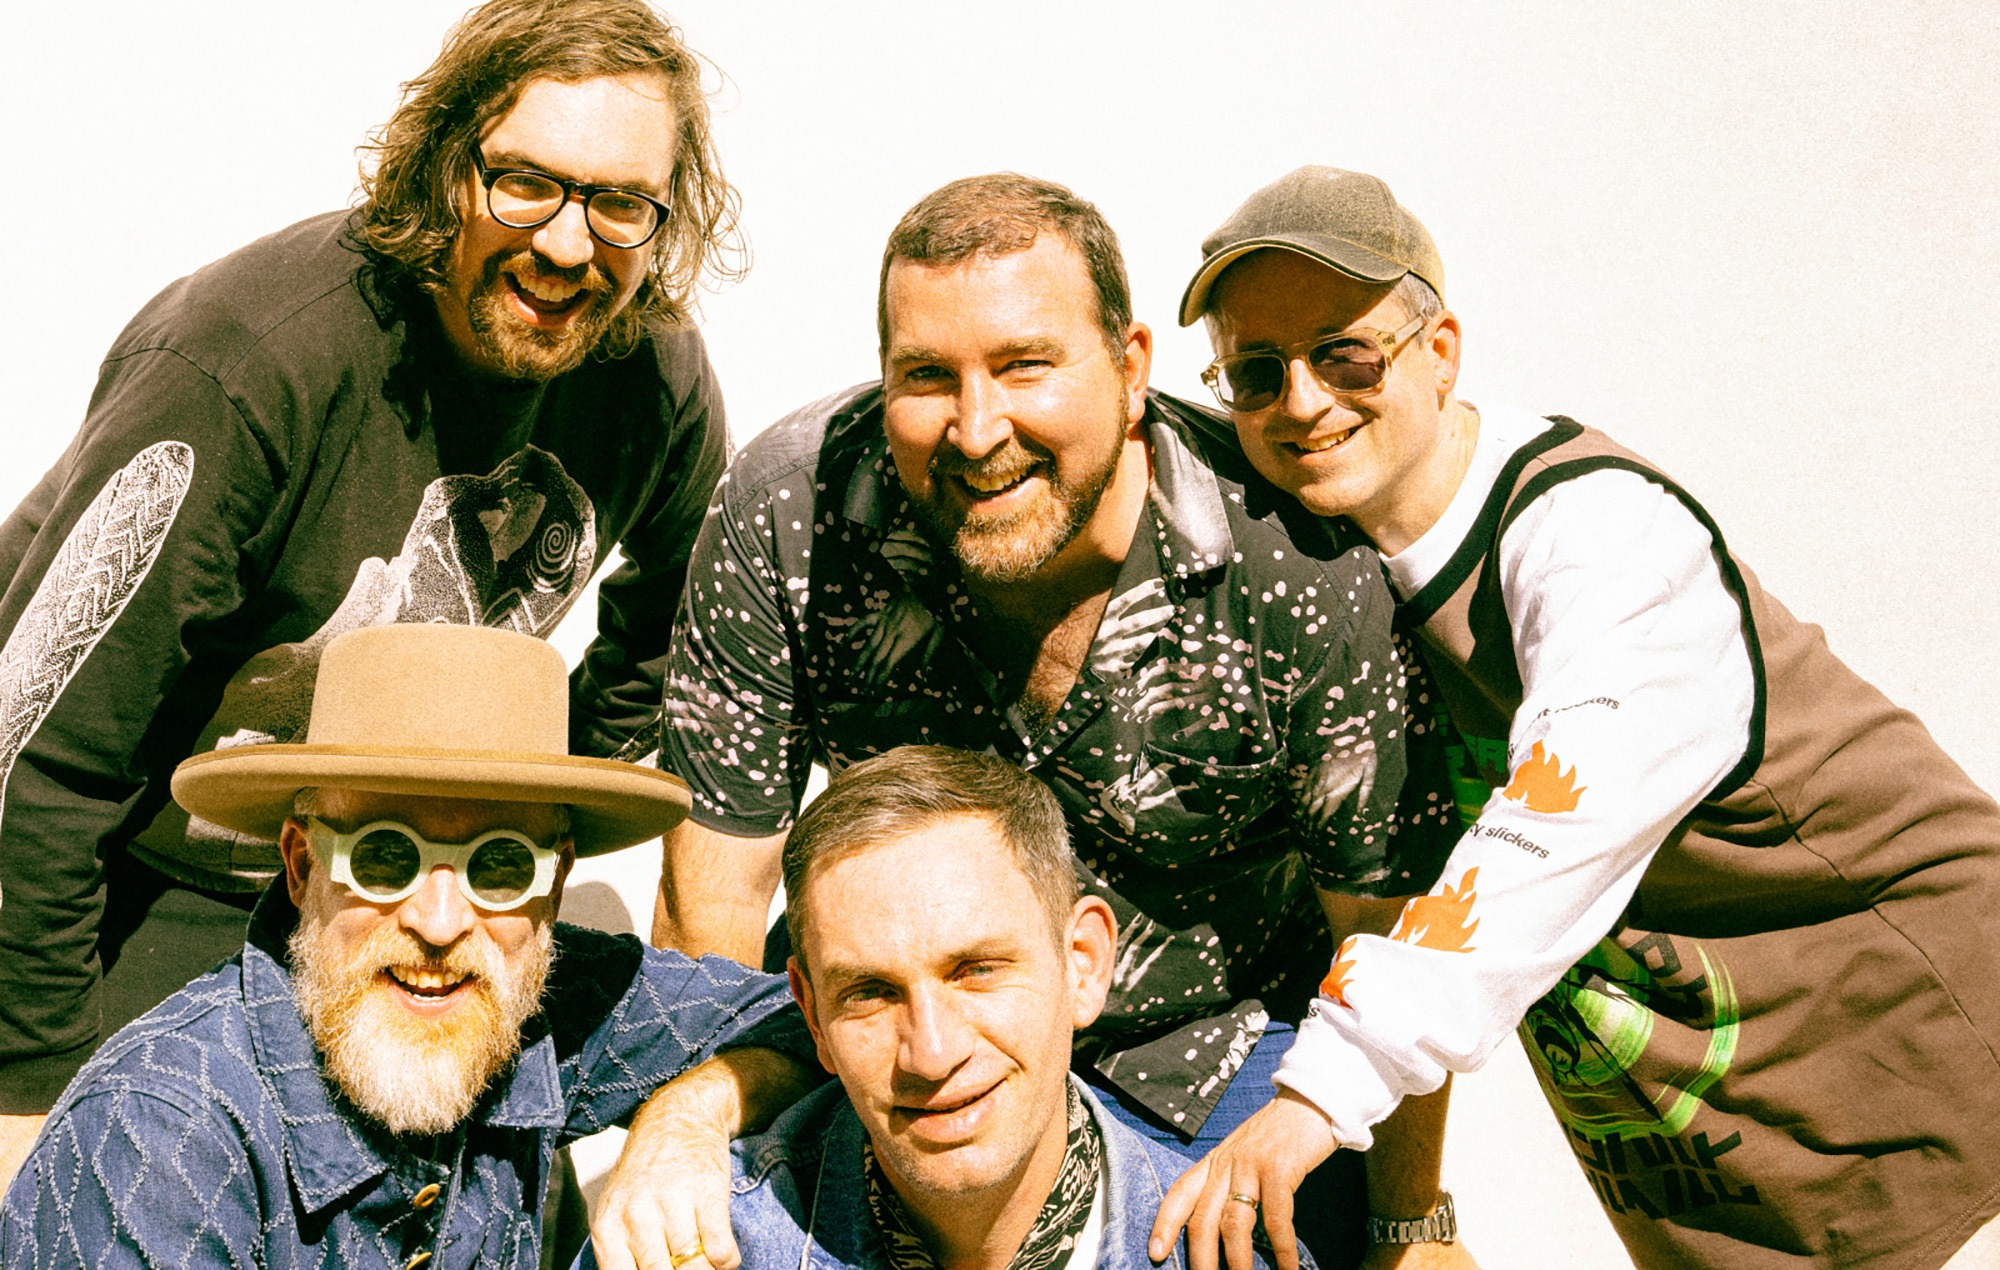 Hot Chip: “Making this record was one of the weirdest and darkest times for us”